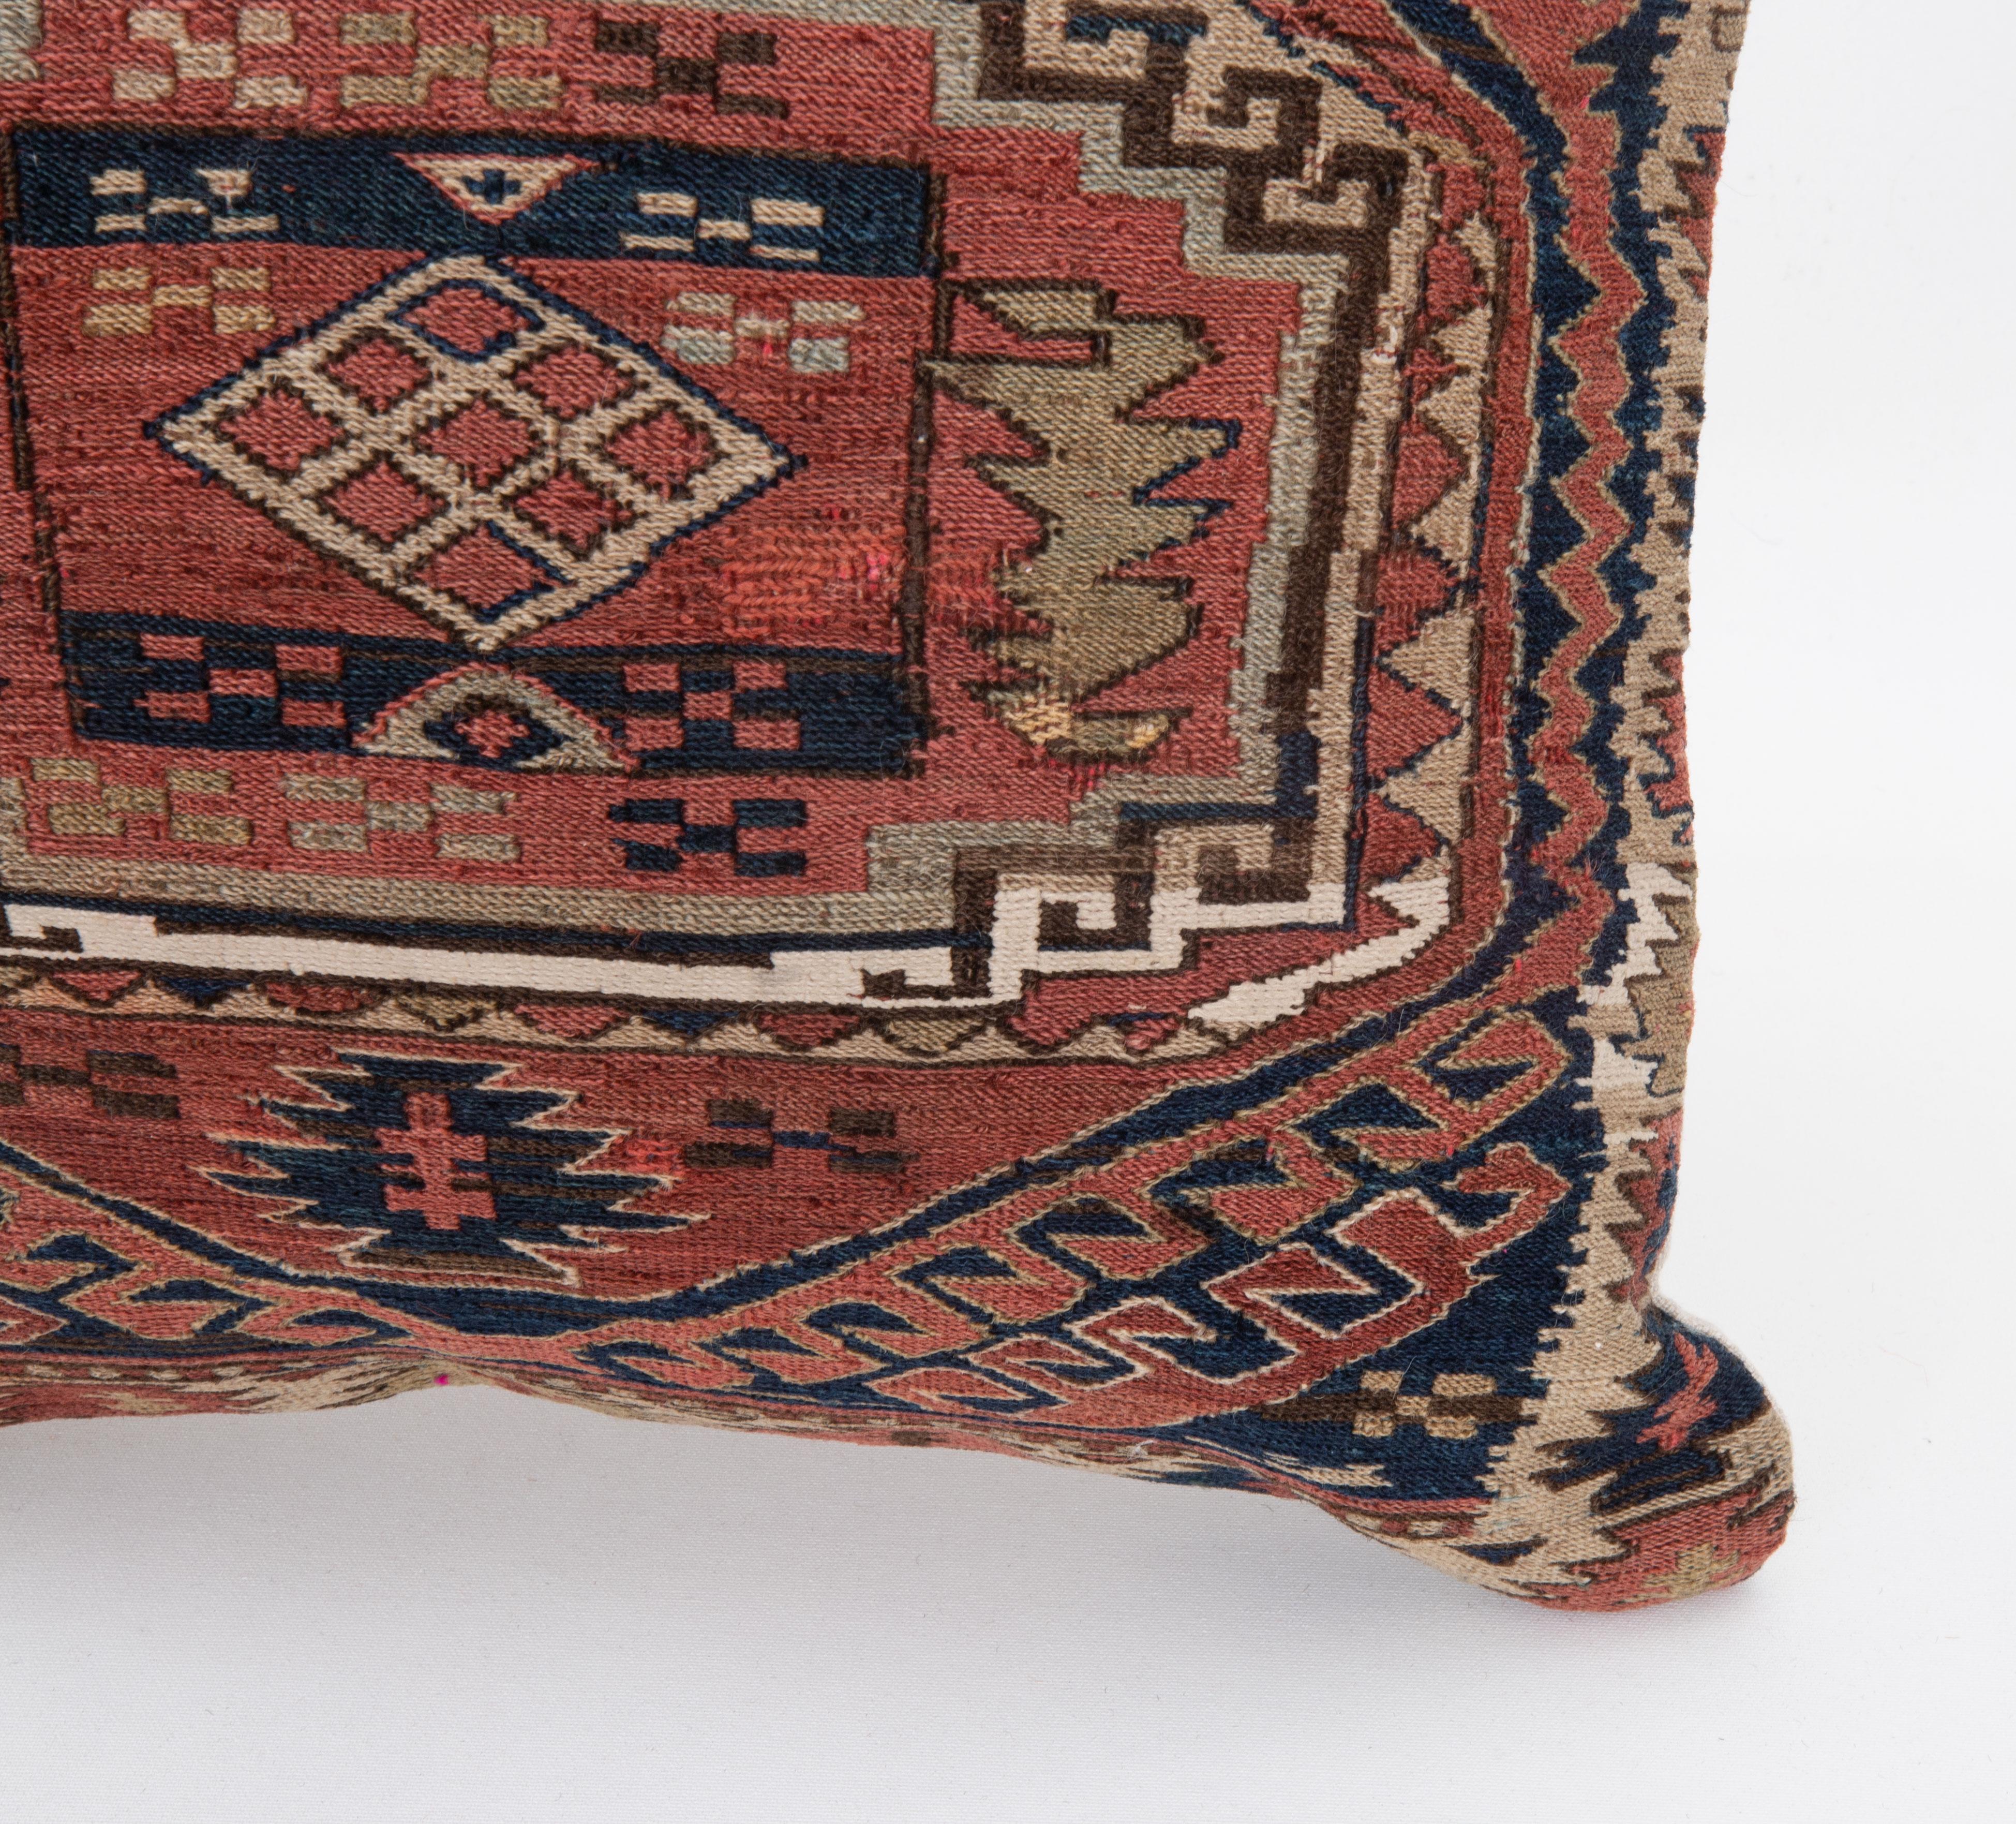 Hand-Woven Pillow Cover Fashioned from an Antique Caucasian Sumak Bag Face For Sale